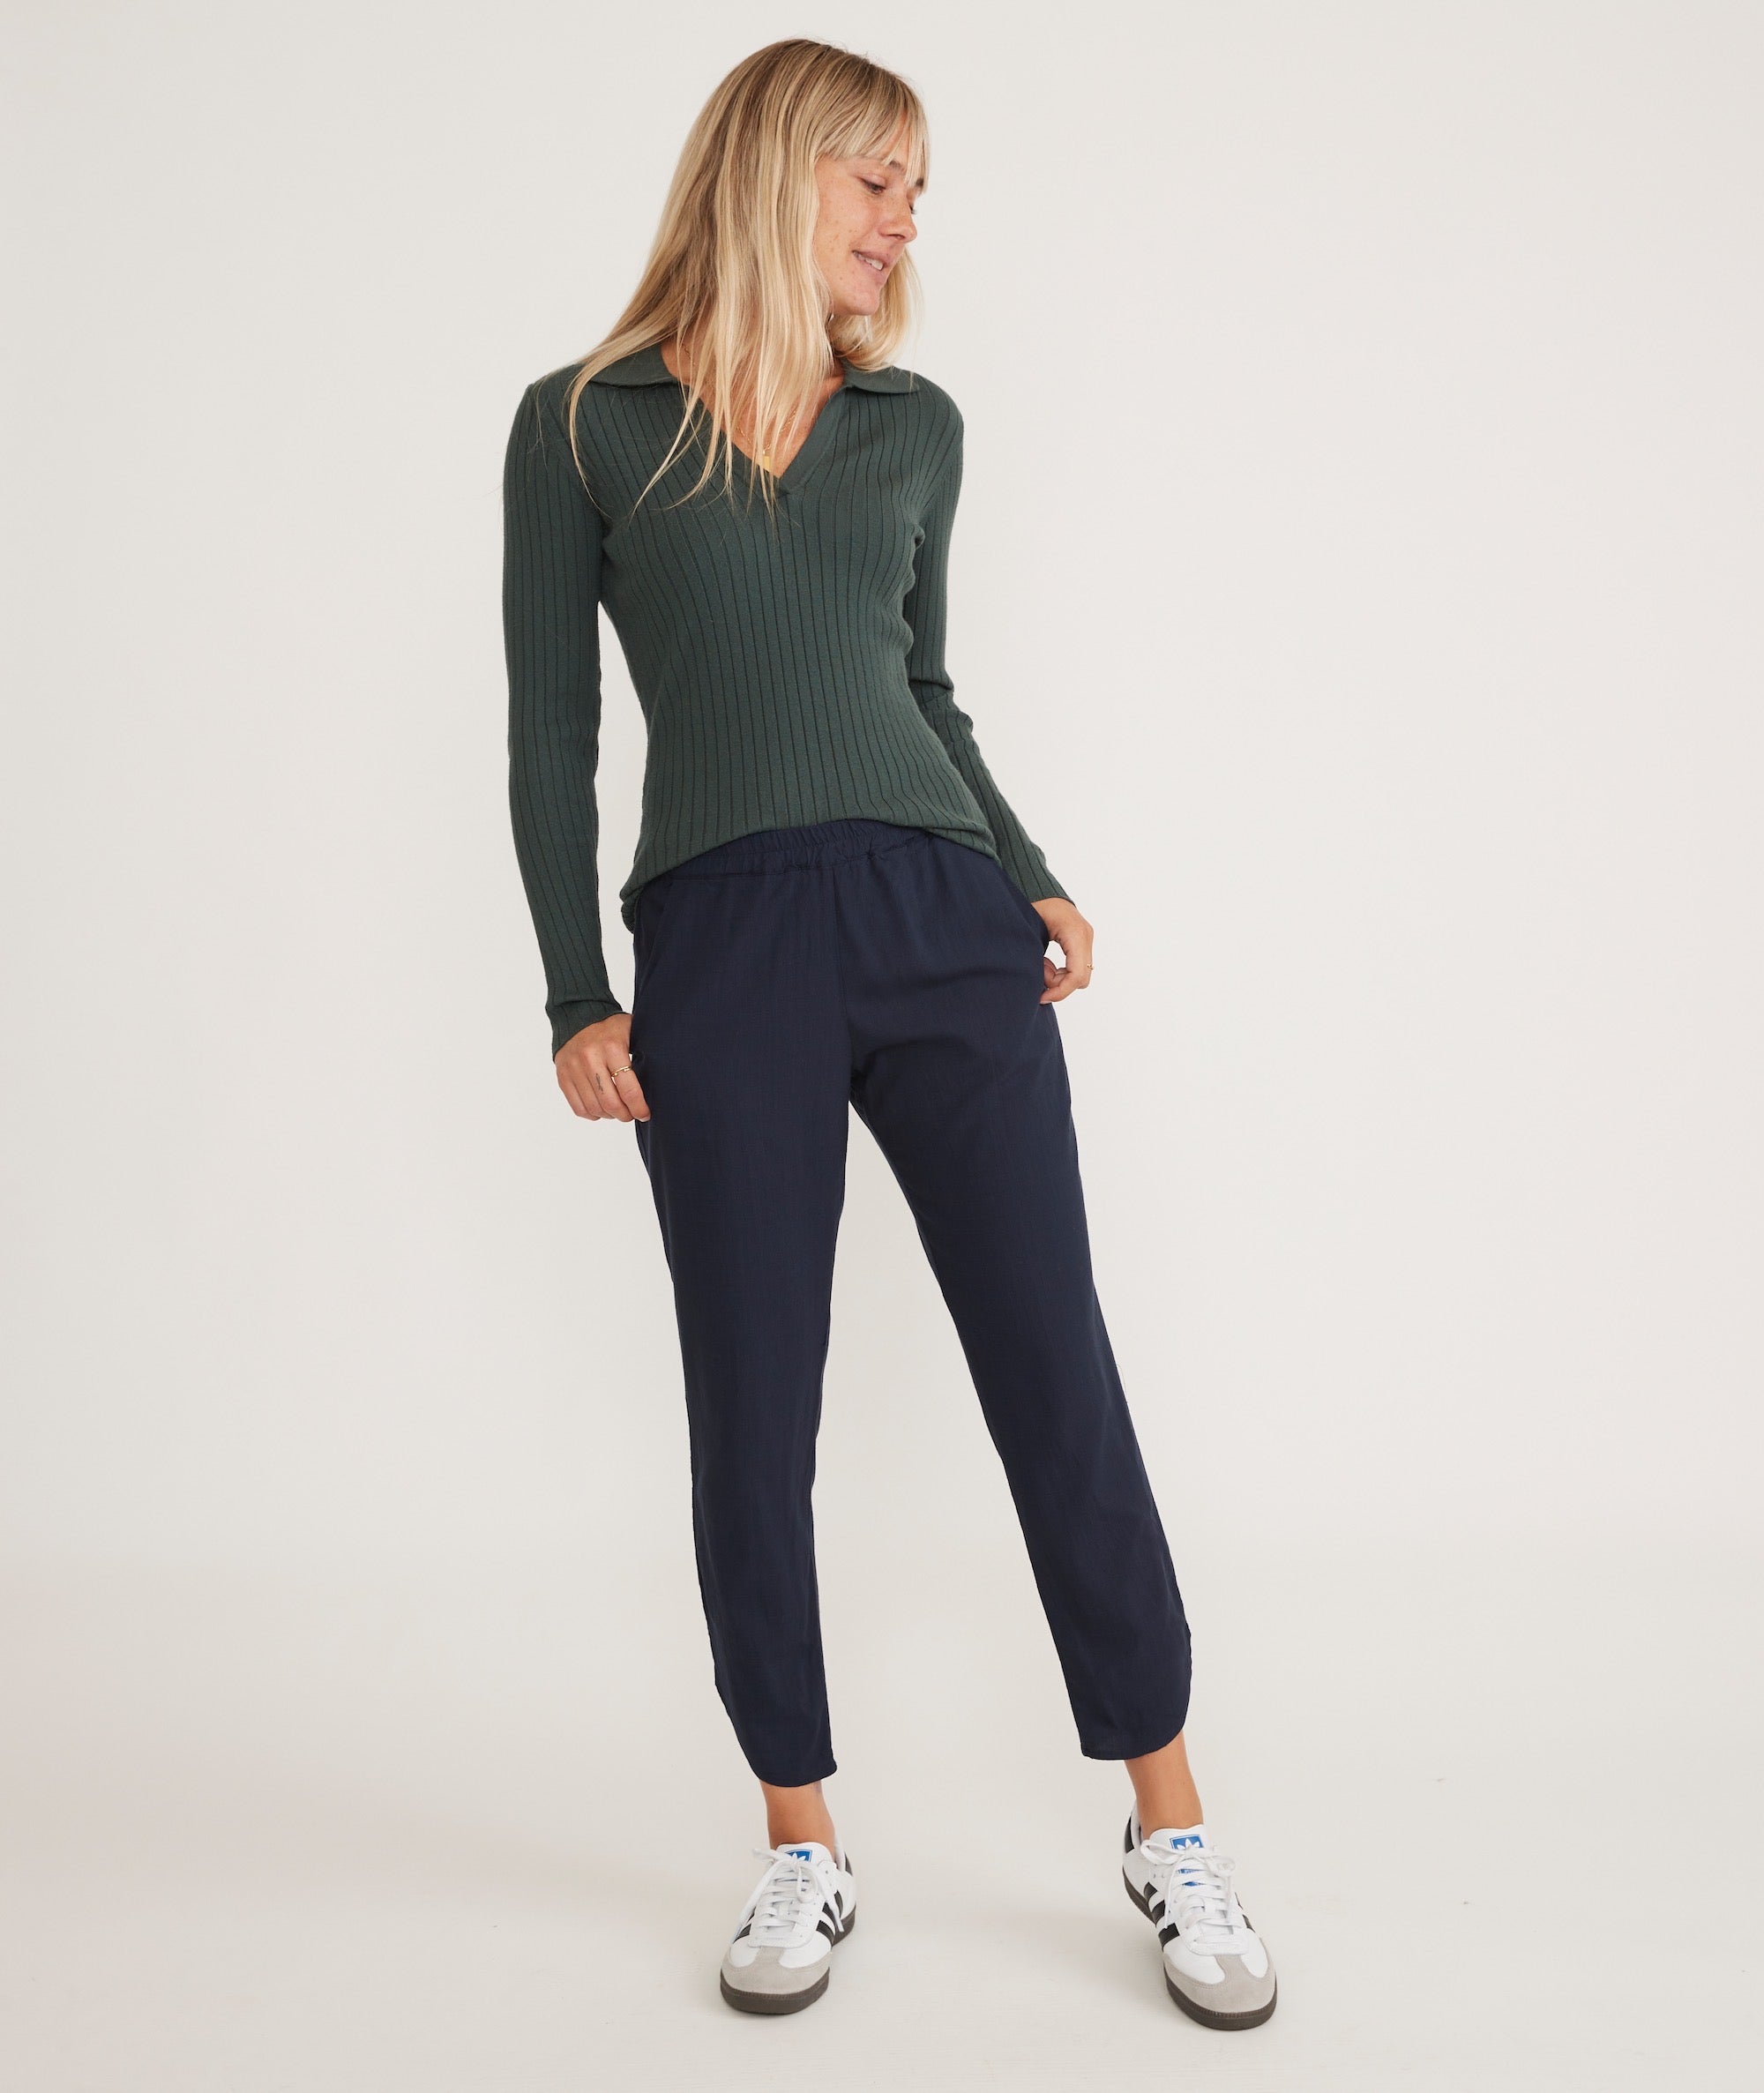 Re-Spun Tall Navy – in Pant Allison Petite and Marine Layer